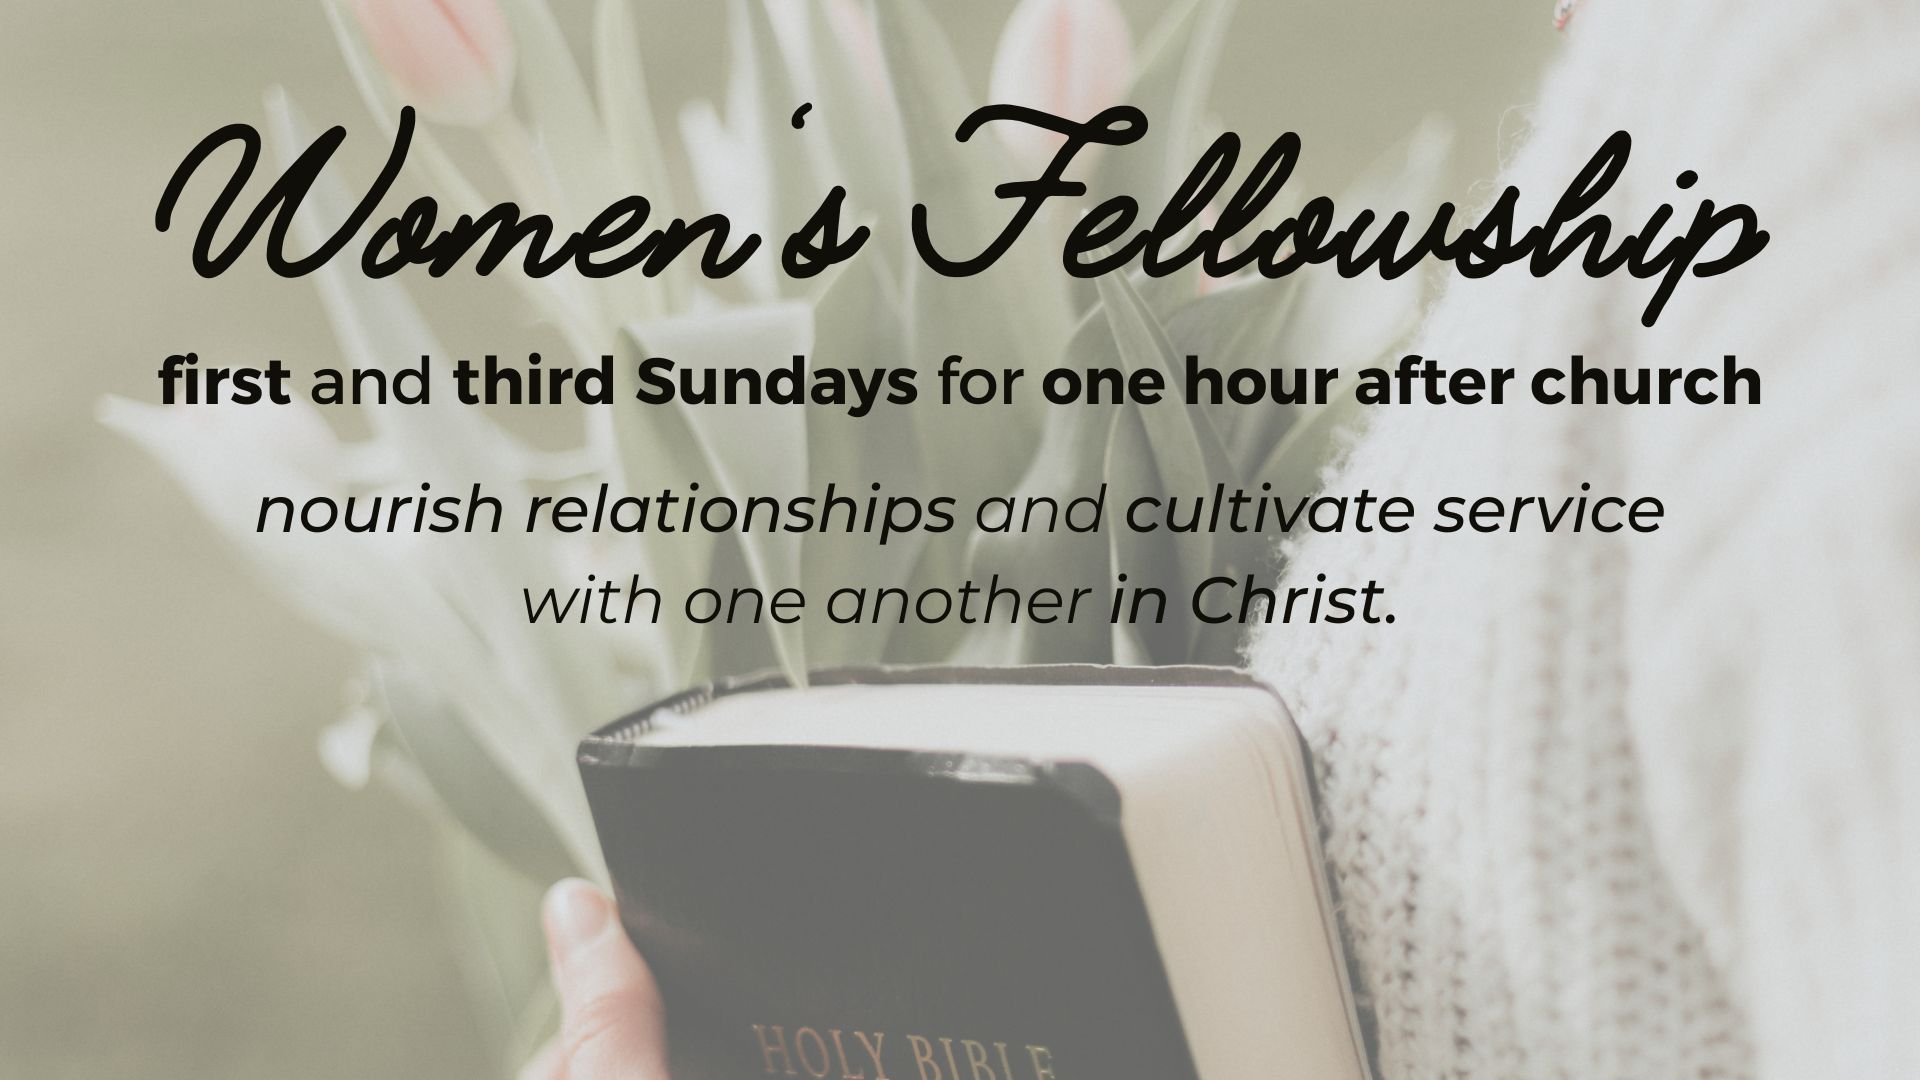 Women's Fellowship Meets first and third Sundays for one hour after church Nourish relationships and cultivate service with one another in Christ. (1).jpg